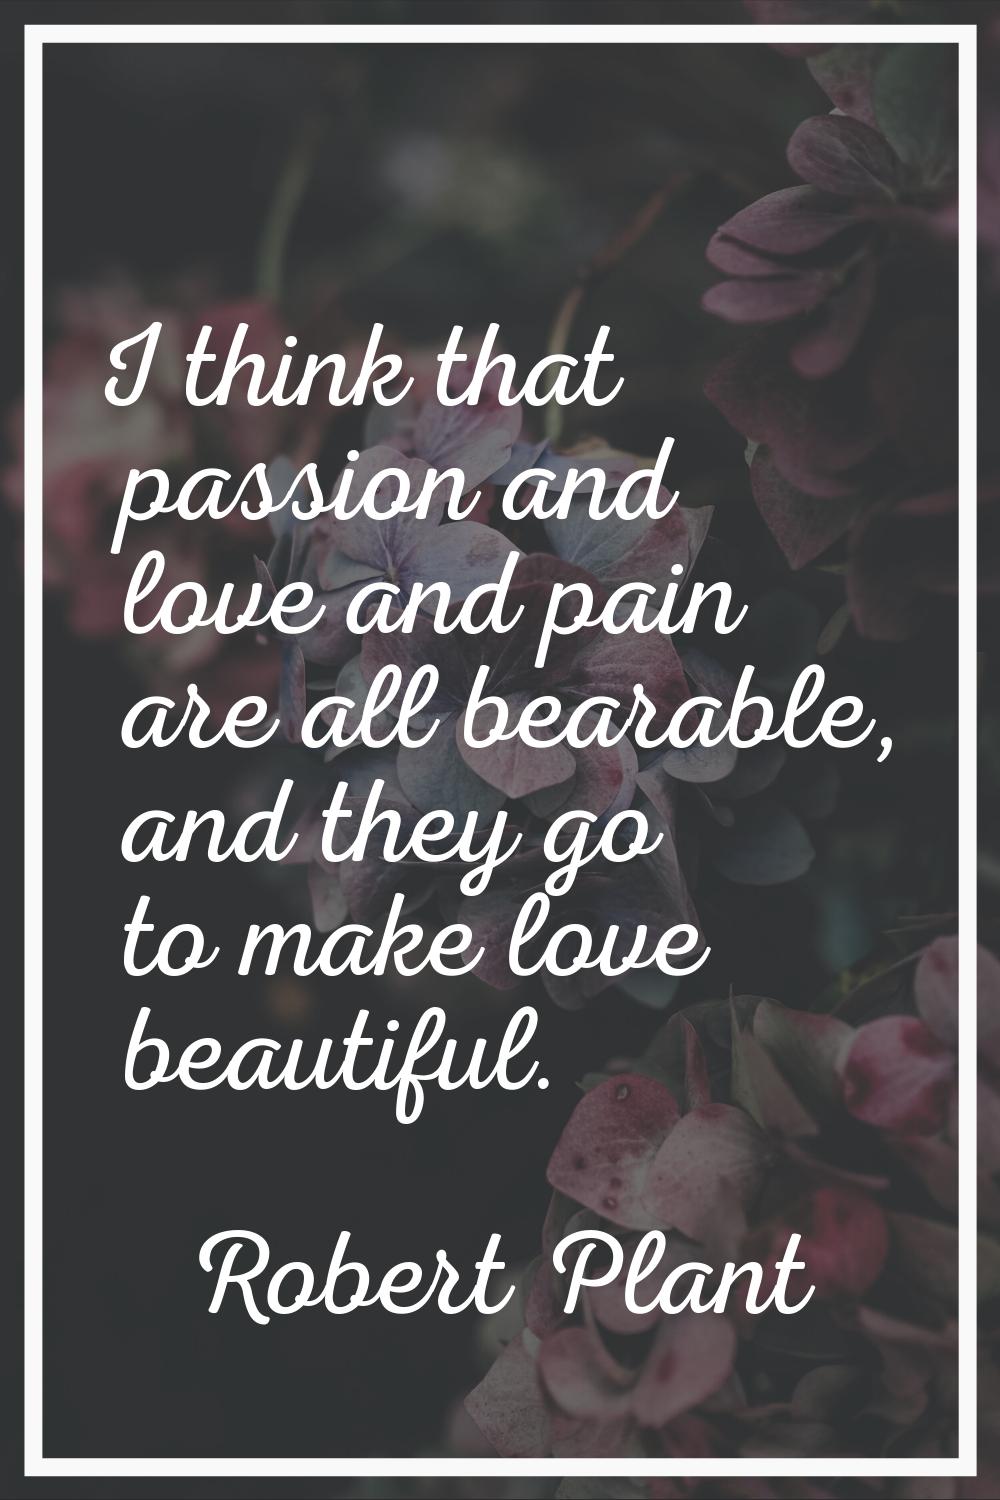 I think that passion and love and pain are all bearable, and they go to make love beautiful.